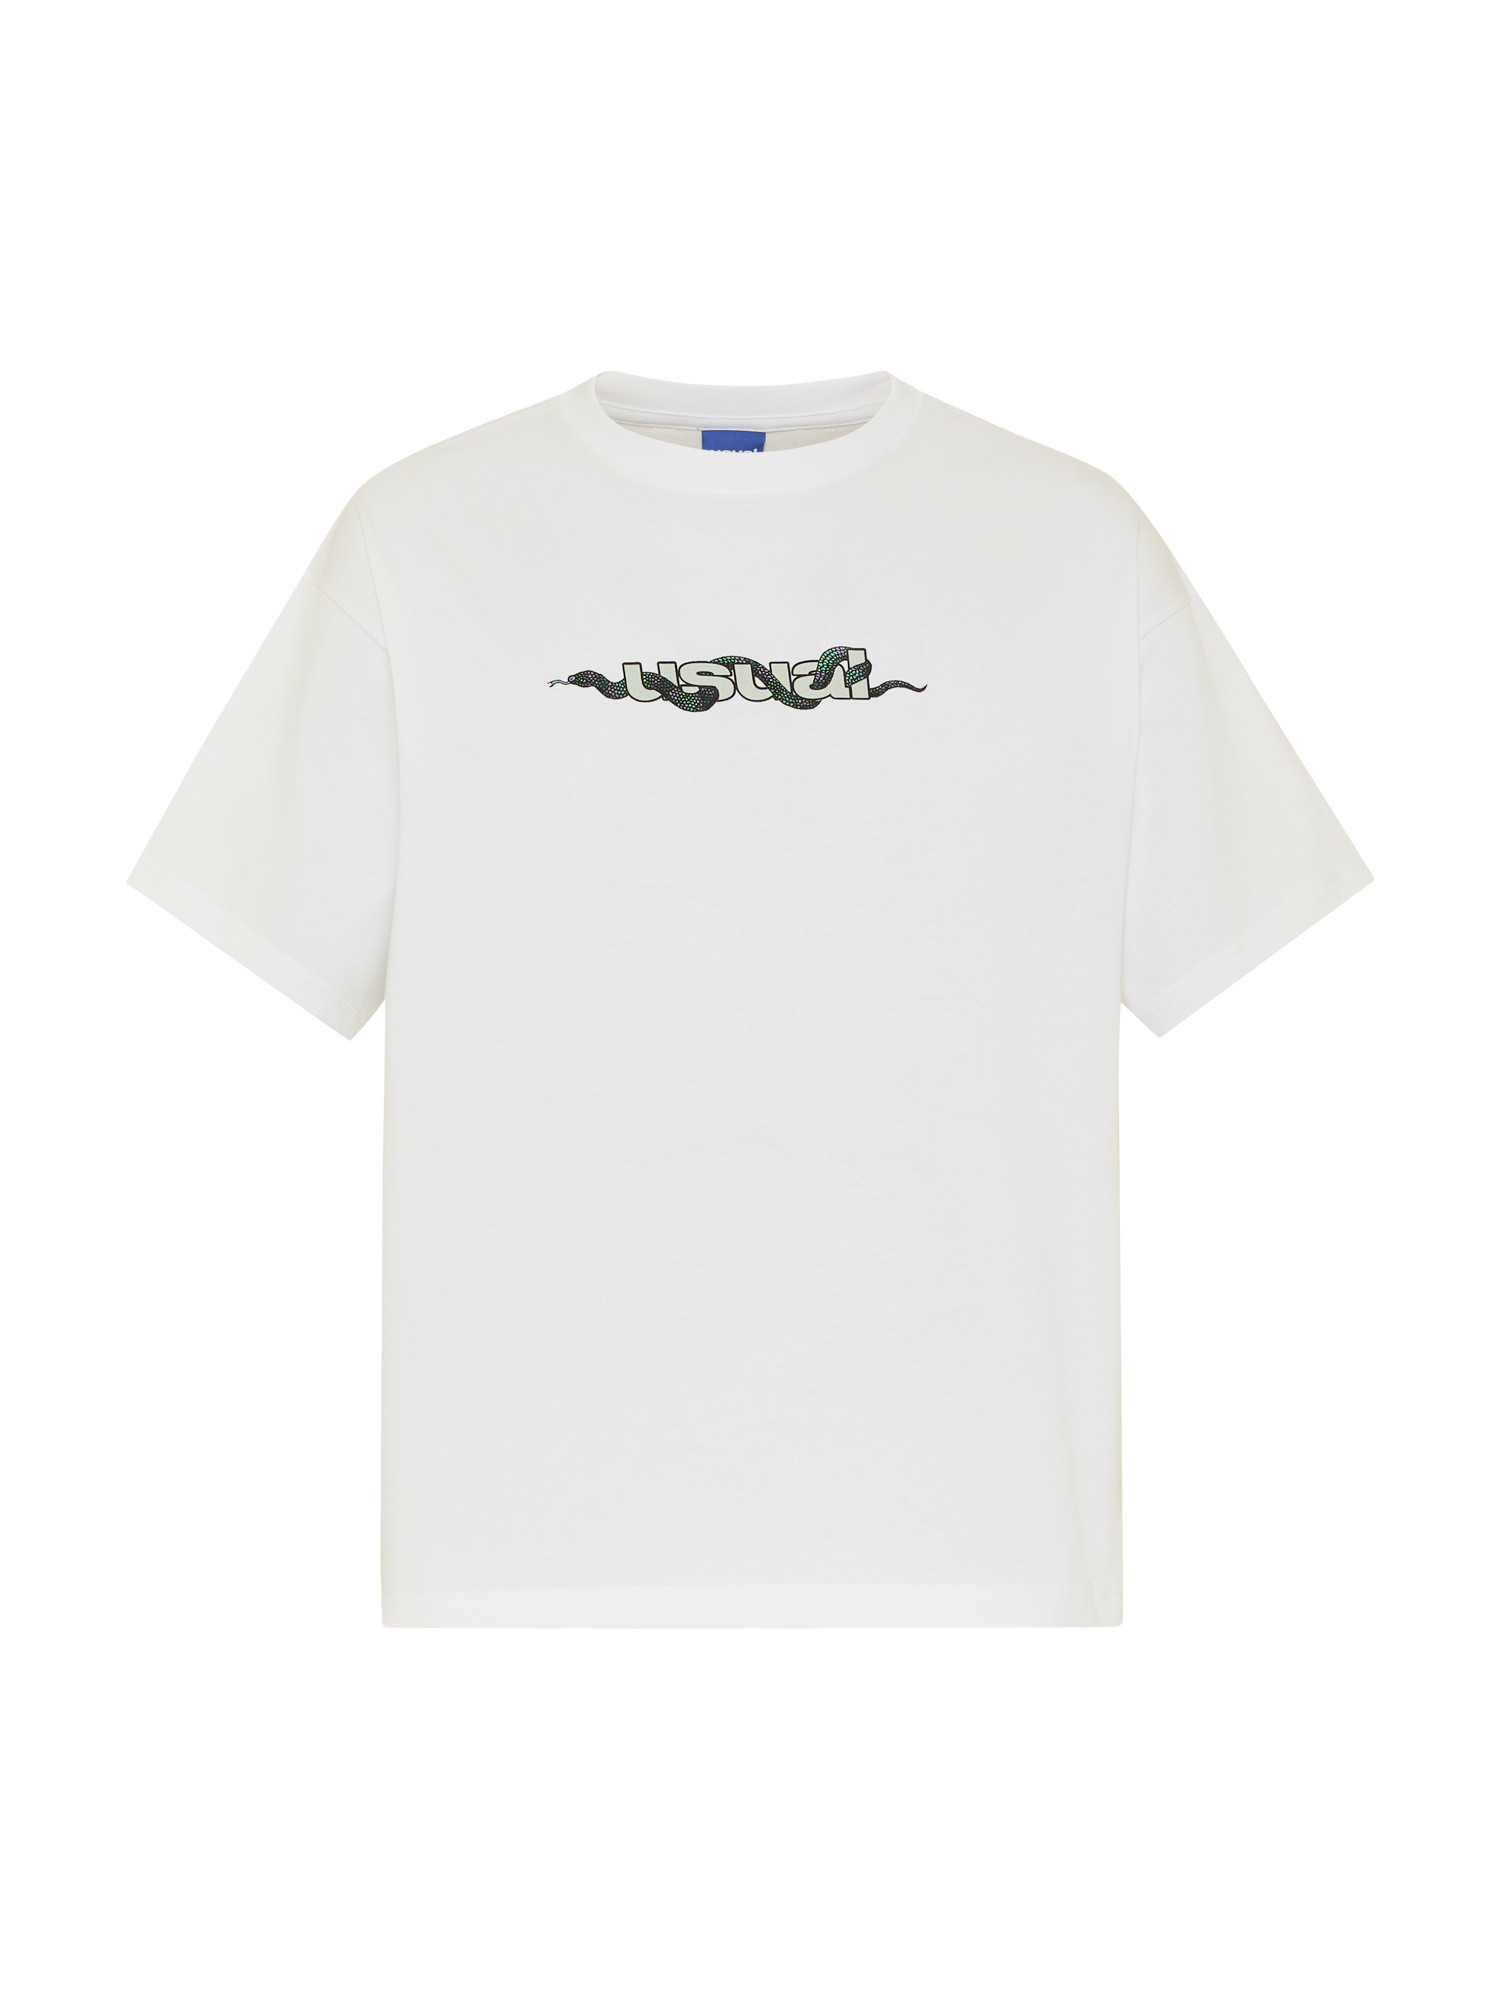 Usual - T-Shirt manica corta Poison, Bianco, large image number 0